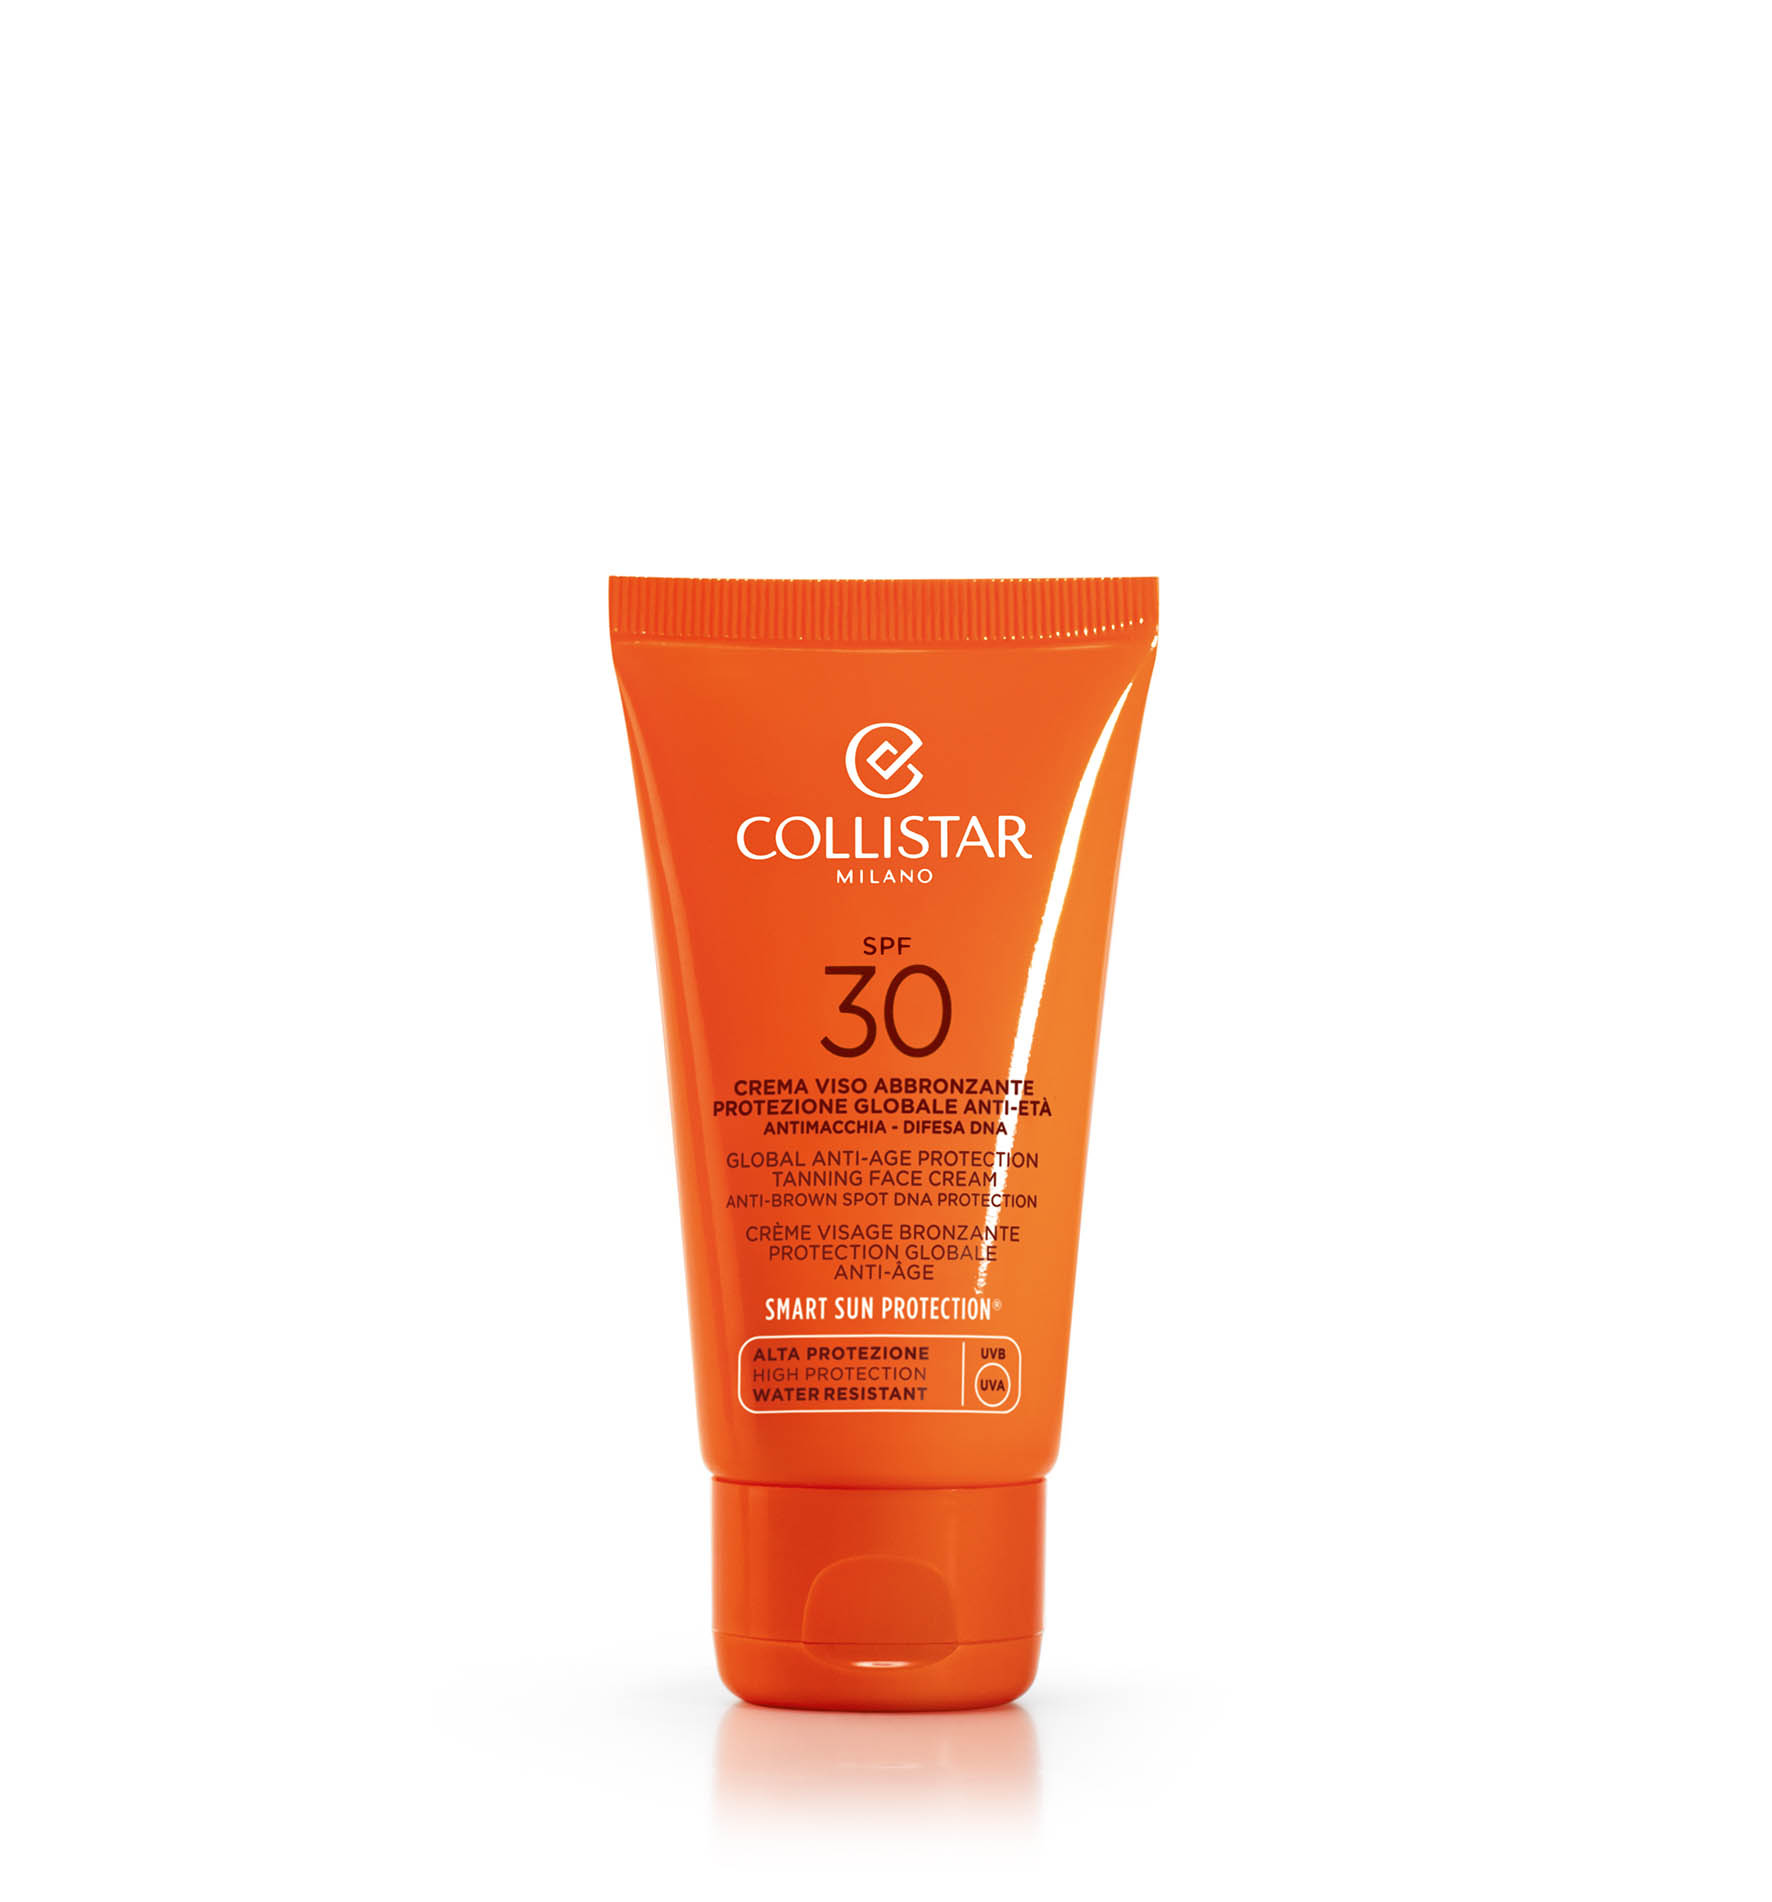 GLOBAL ANTI-AGE PROTECTION TANNING FACE CREAM SPF 30 | Collistar - Shop Online Ufficiale